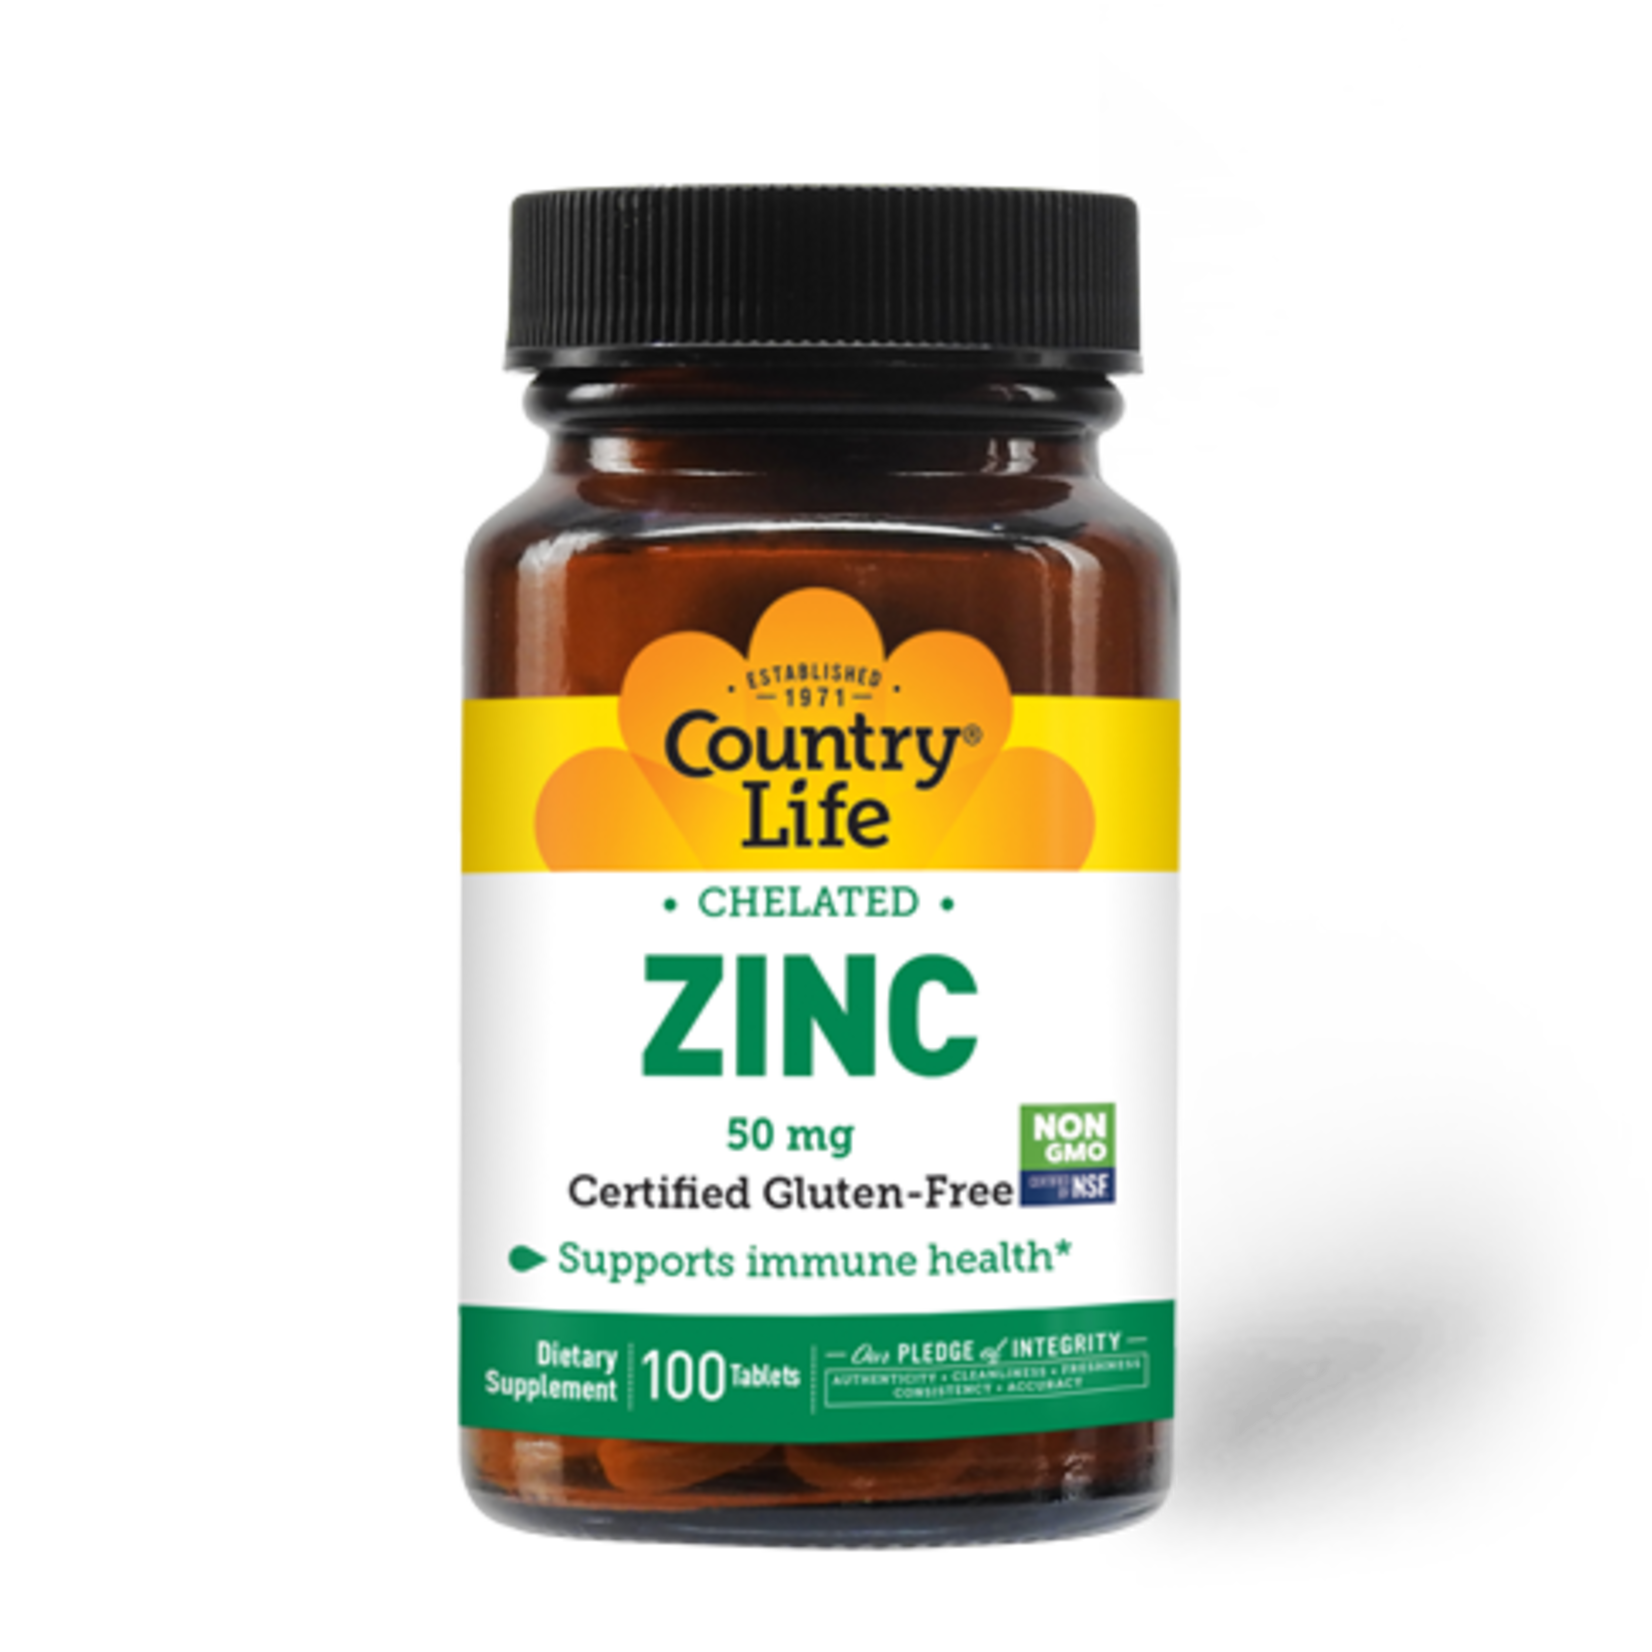 Country Life Country Life - Chelated Zinc 50 mg - 100 Tablets